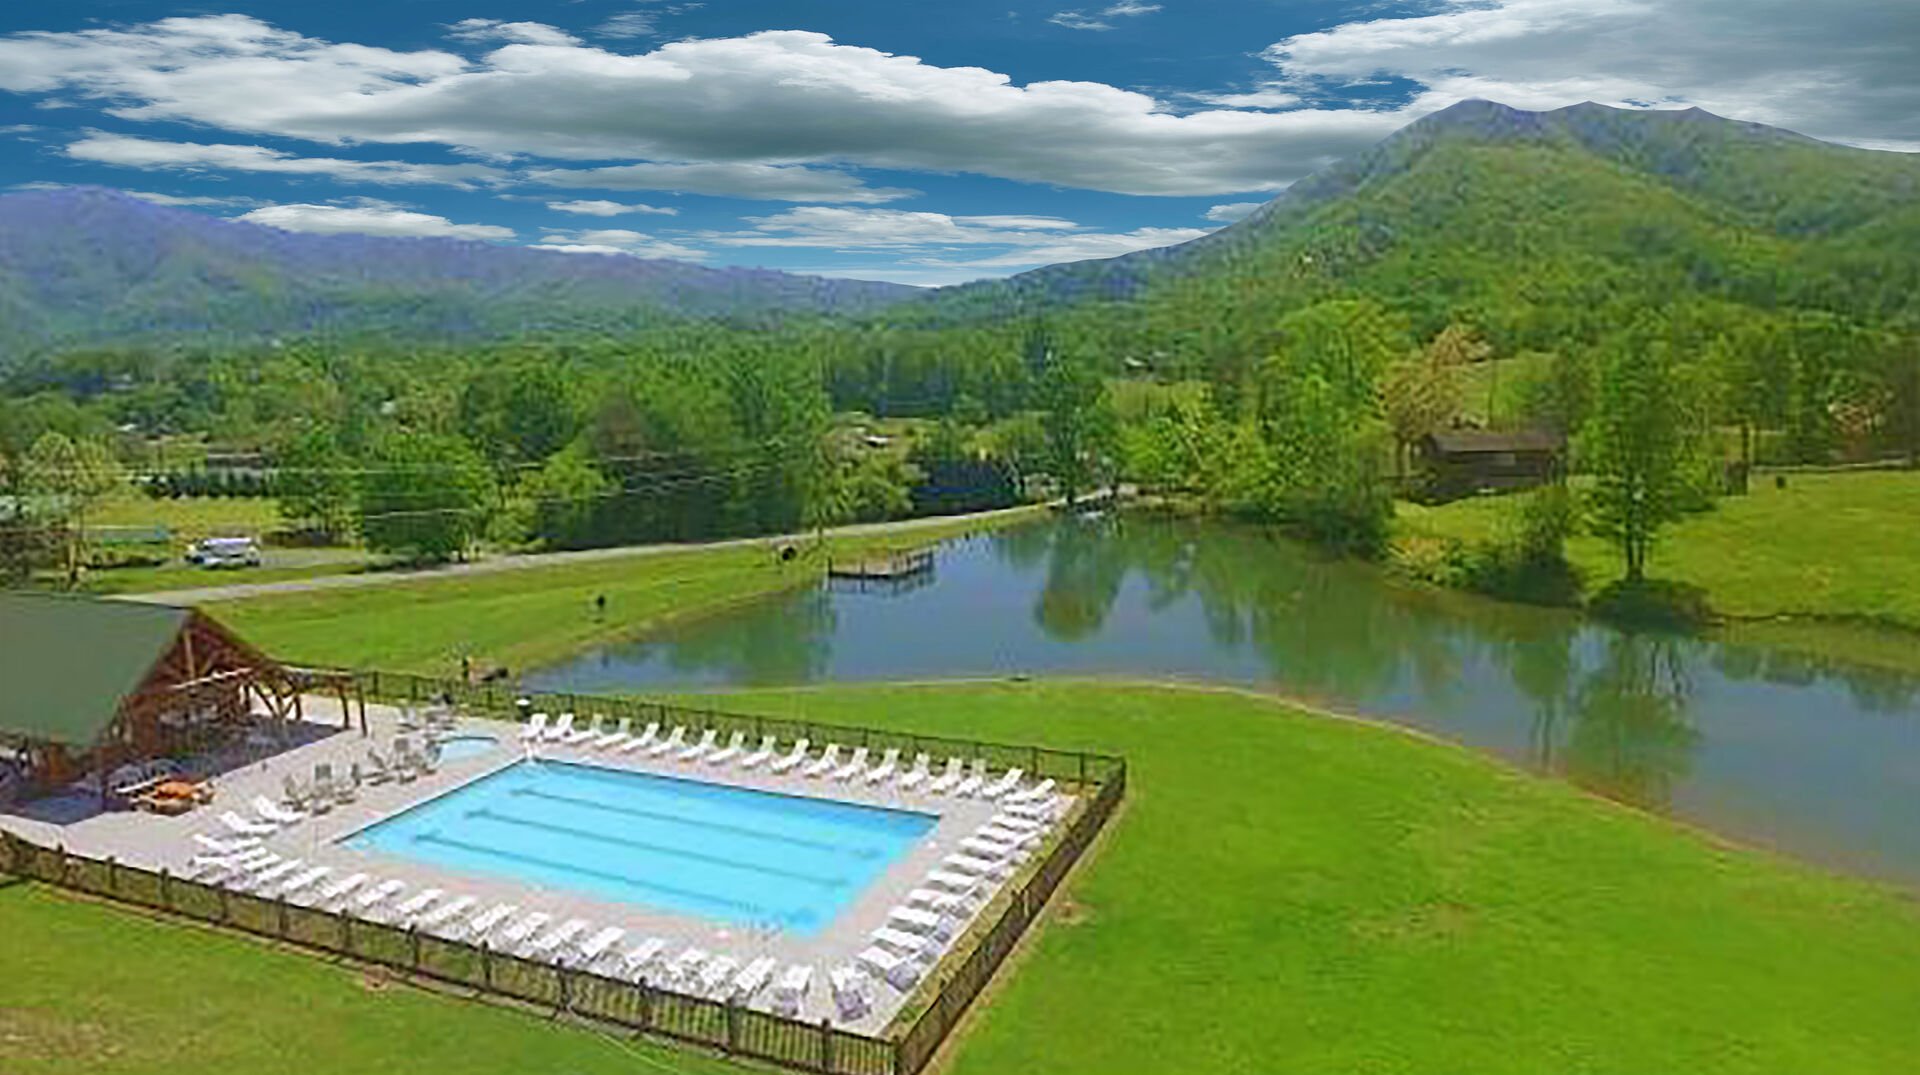 Free access for all guests at Bearmont Lodge to Honeysuckle Meadows Pool with fishing pond